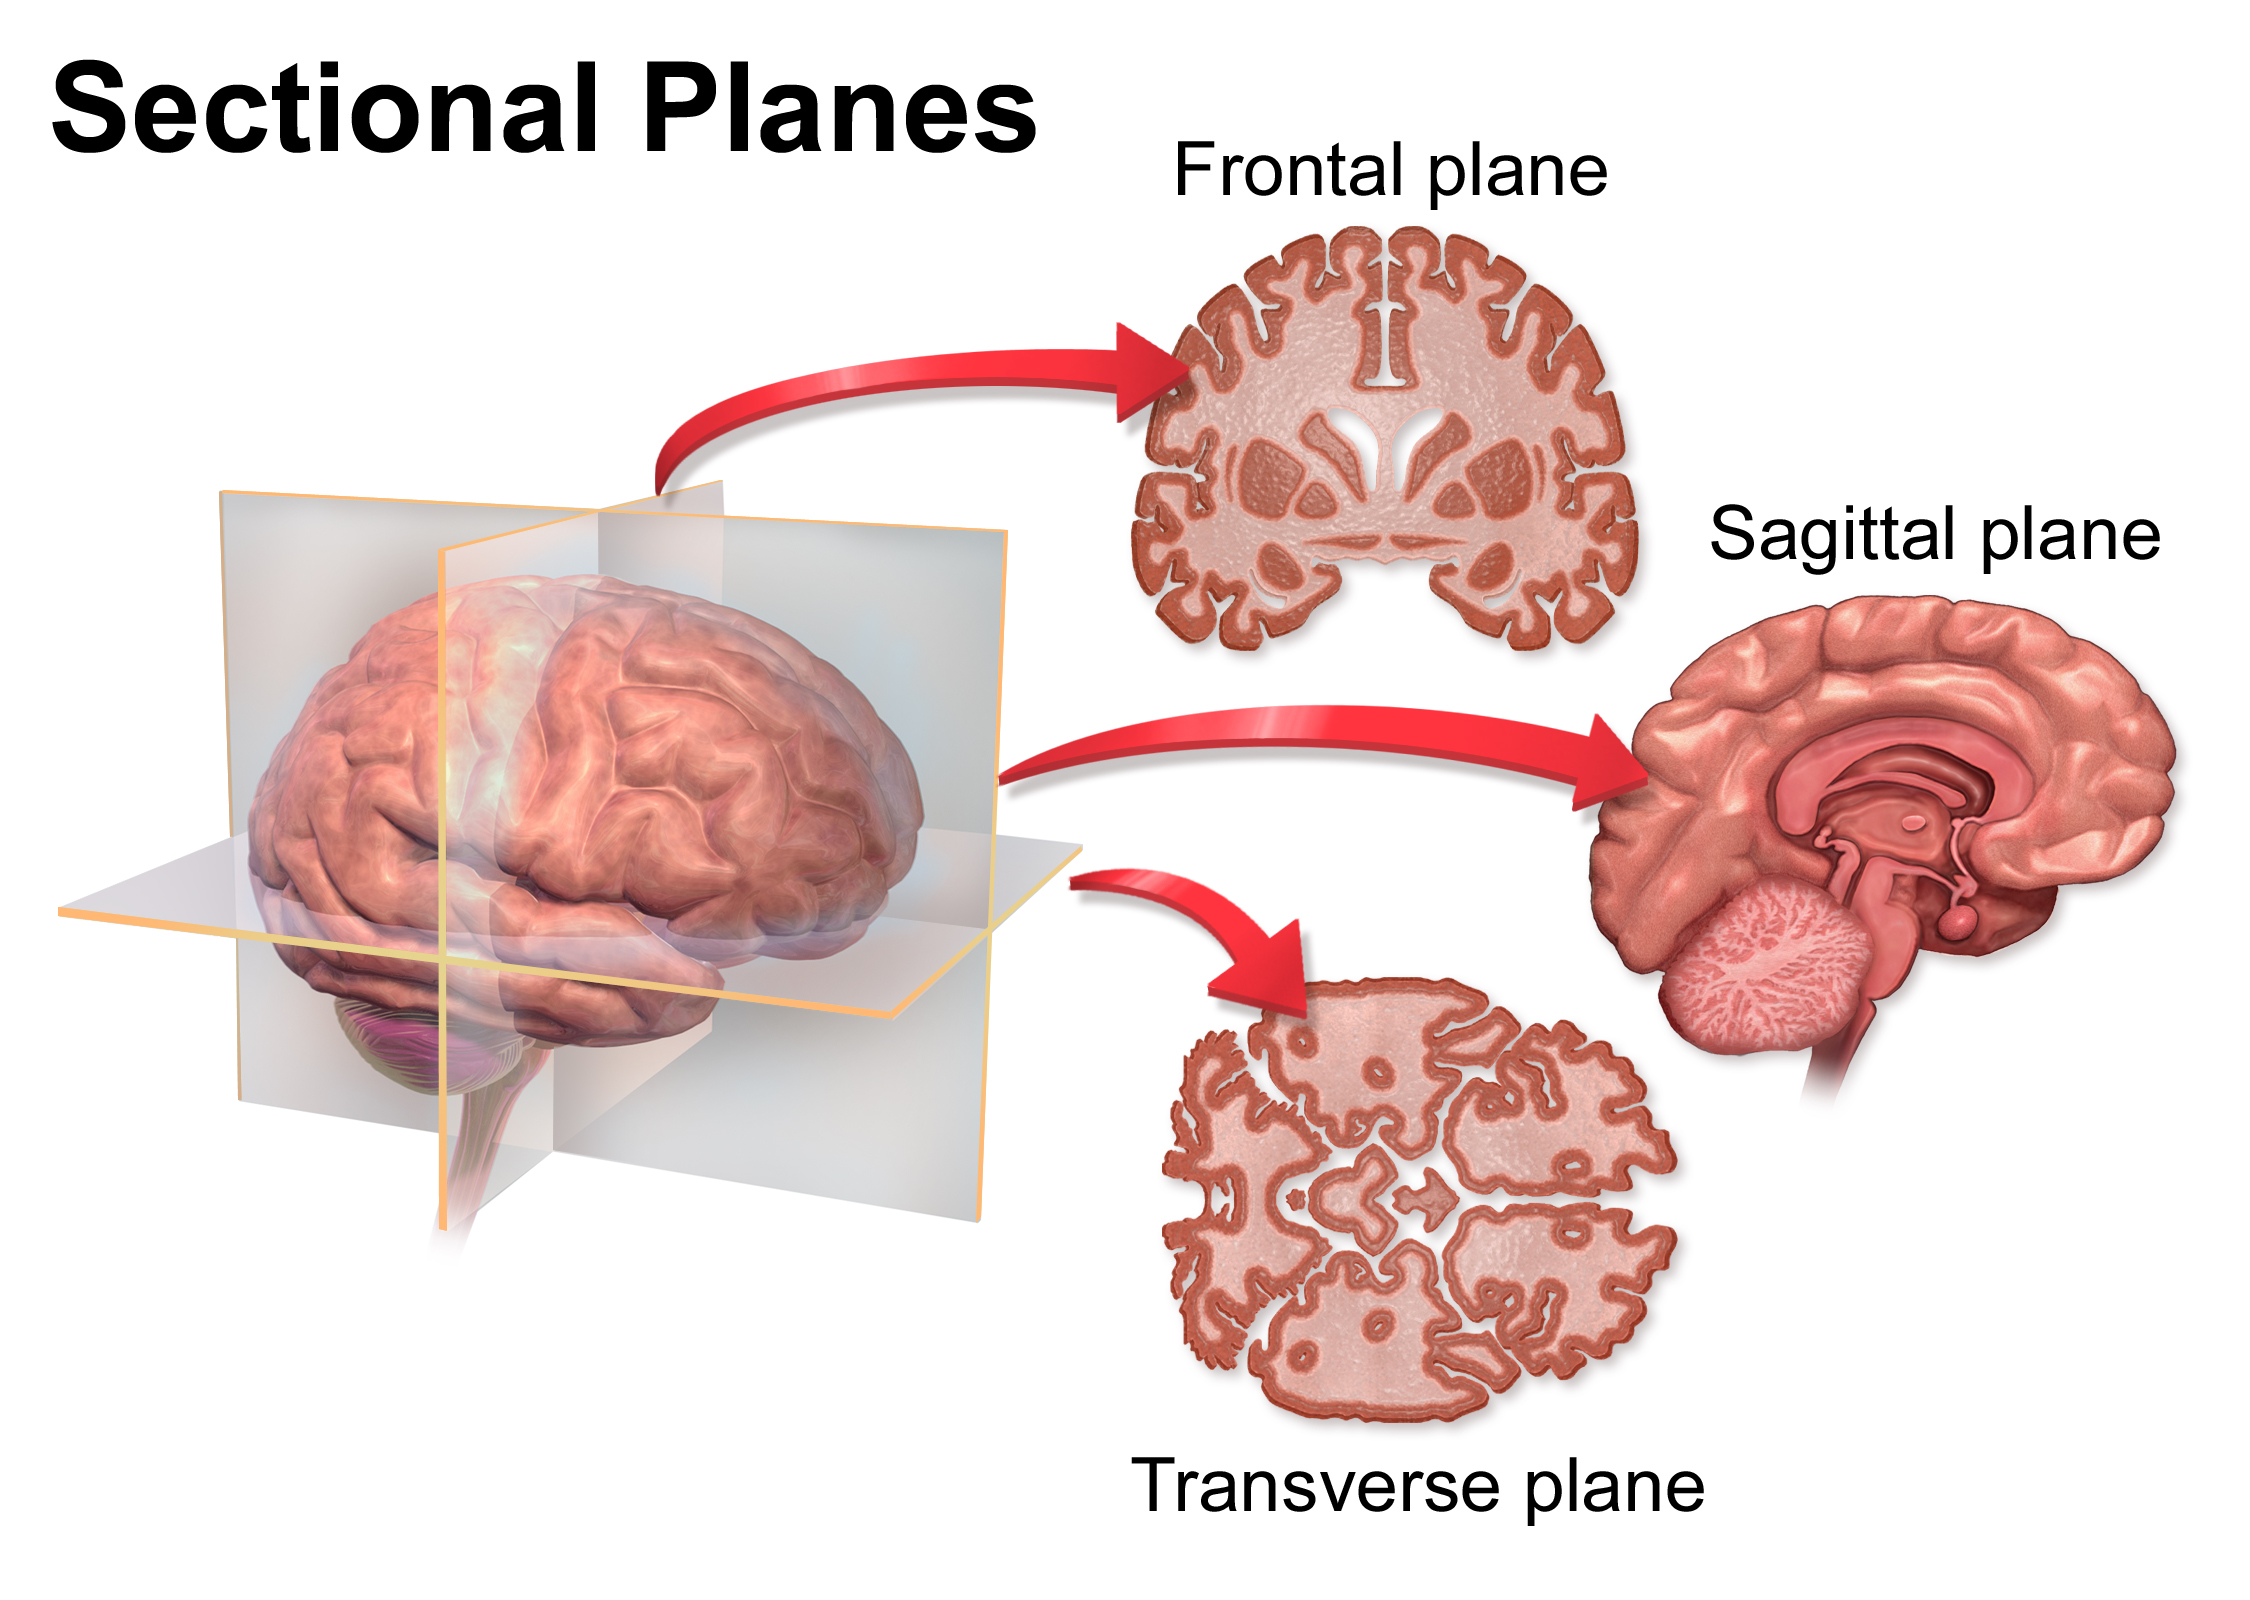 Diagram of sectional planes through the human brain: frontal, sagittal, and transverse.